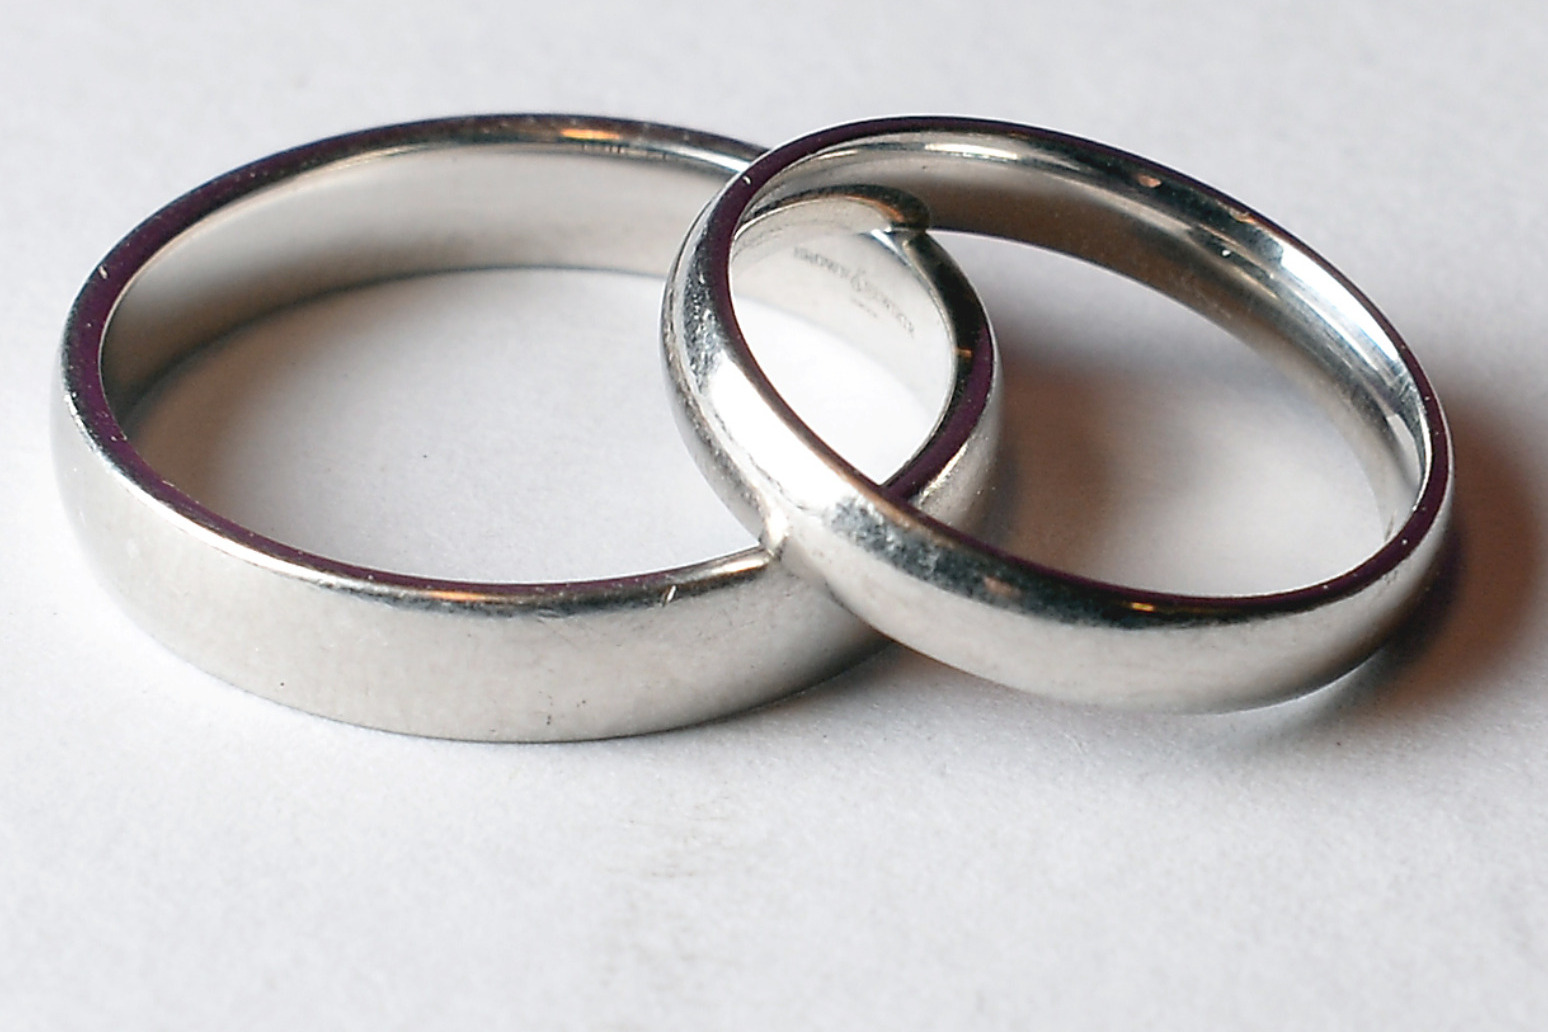 No fault divorce law hallelujah moment for couples who seek amicable split